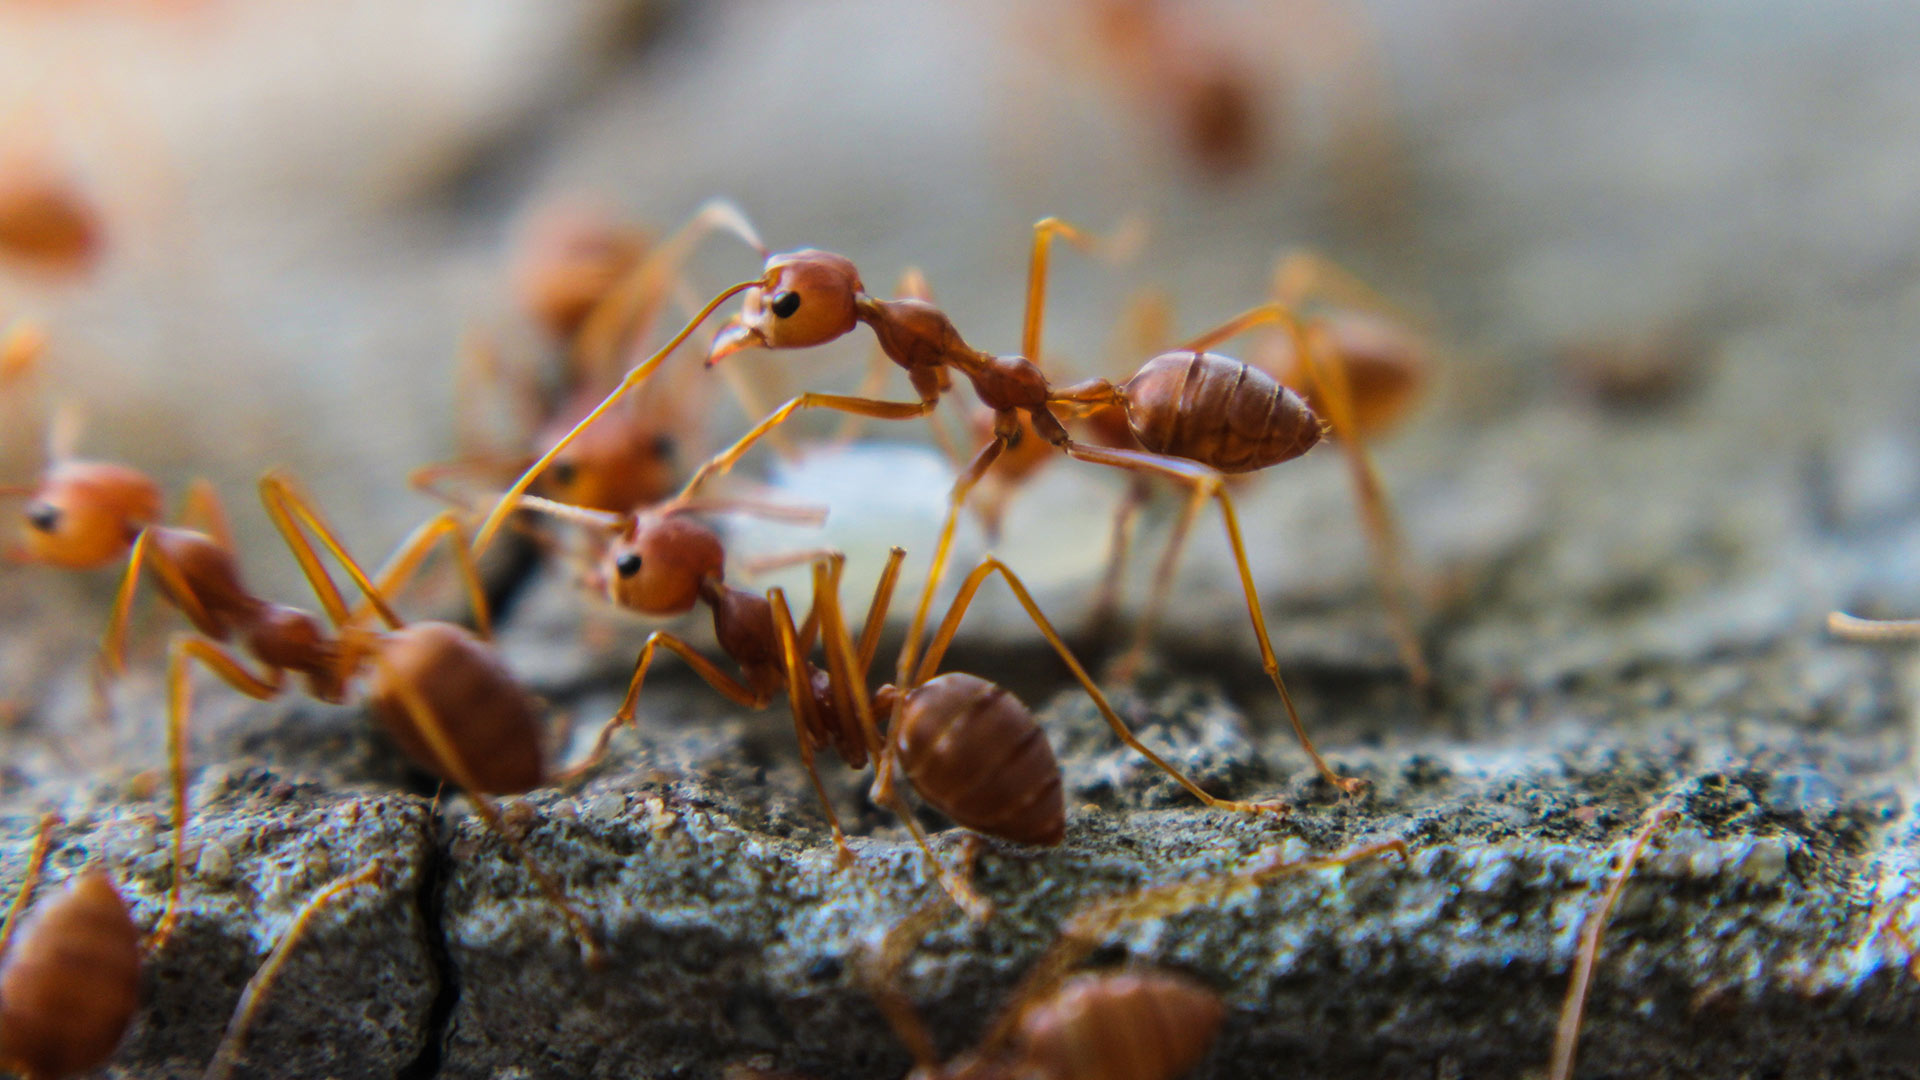 Don’t Try & Handle Your Fire Ant Problem on Your Own - Always Hire Pros